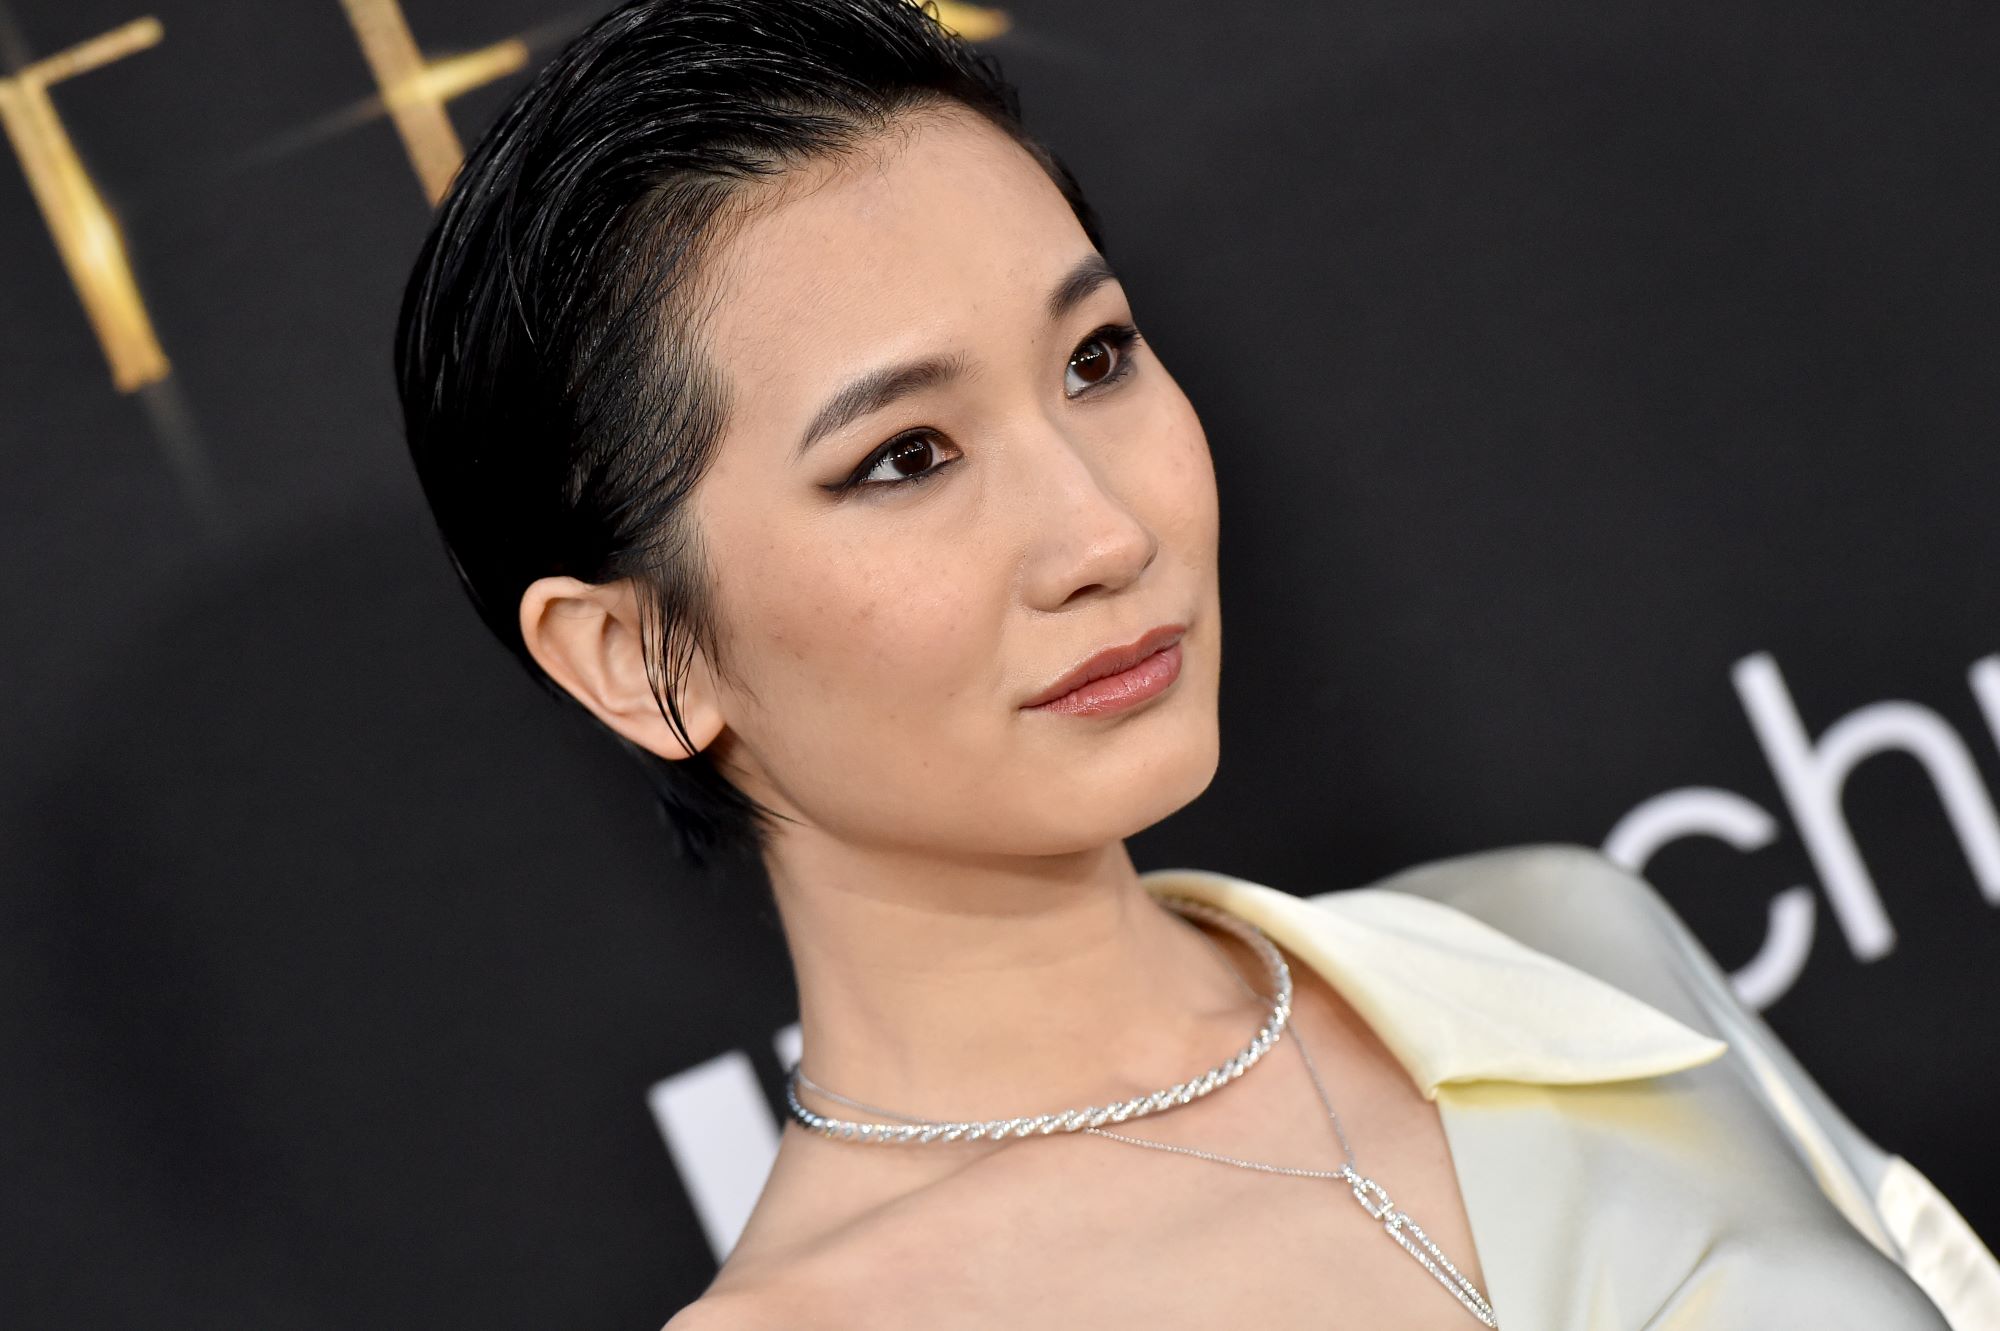 'Shang-Chi' star Meng'er Zhang, who may be in the sequel, wears a white blouse and a layered silver necklace.